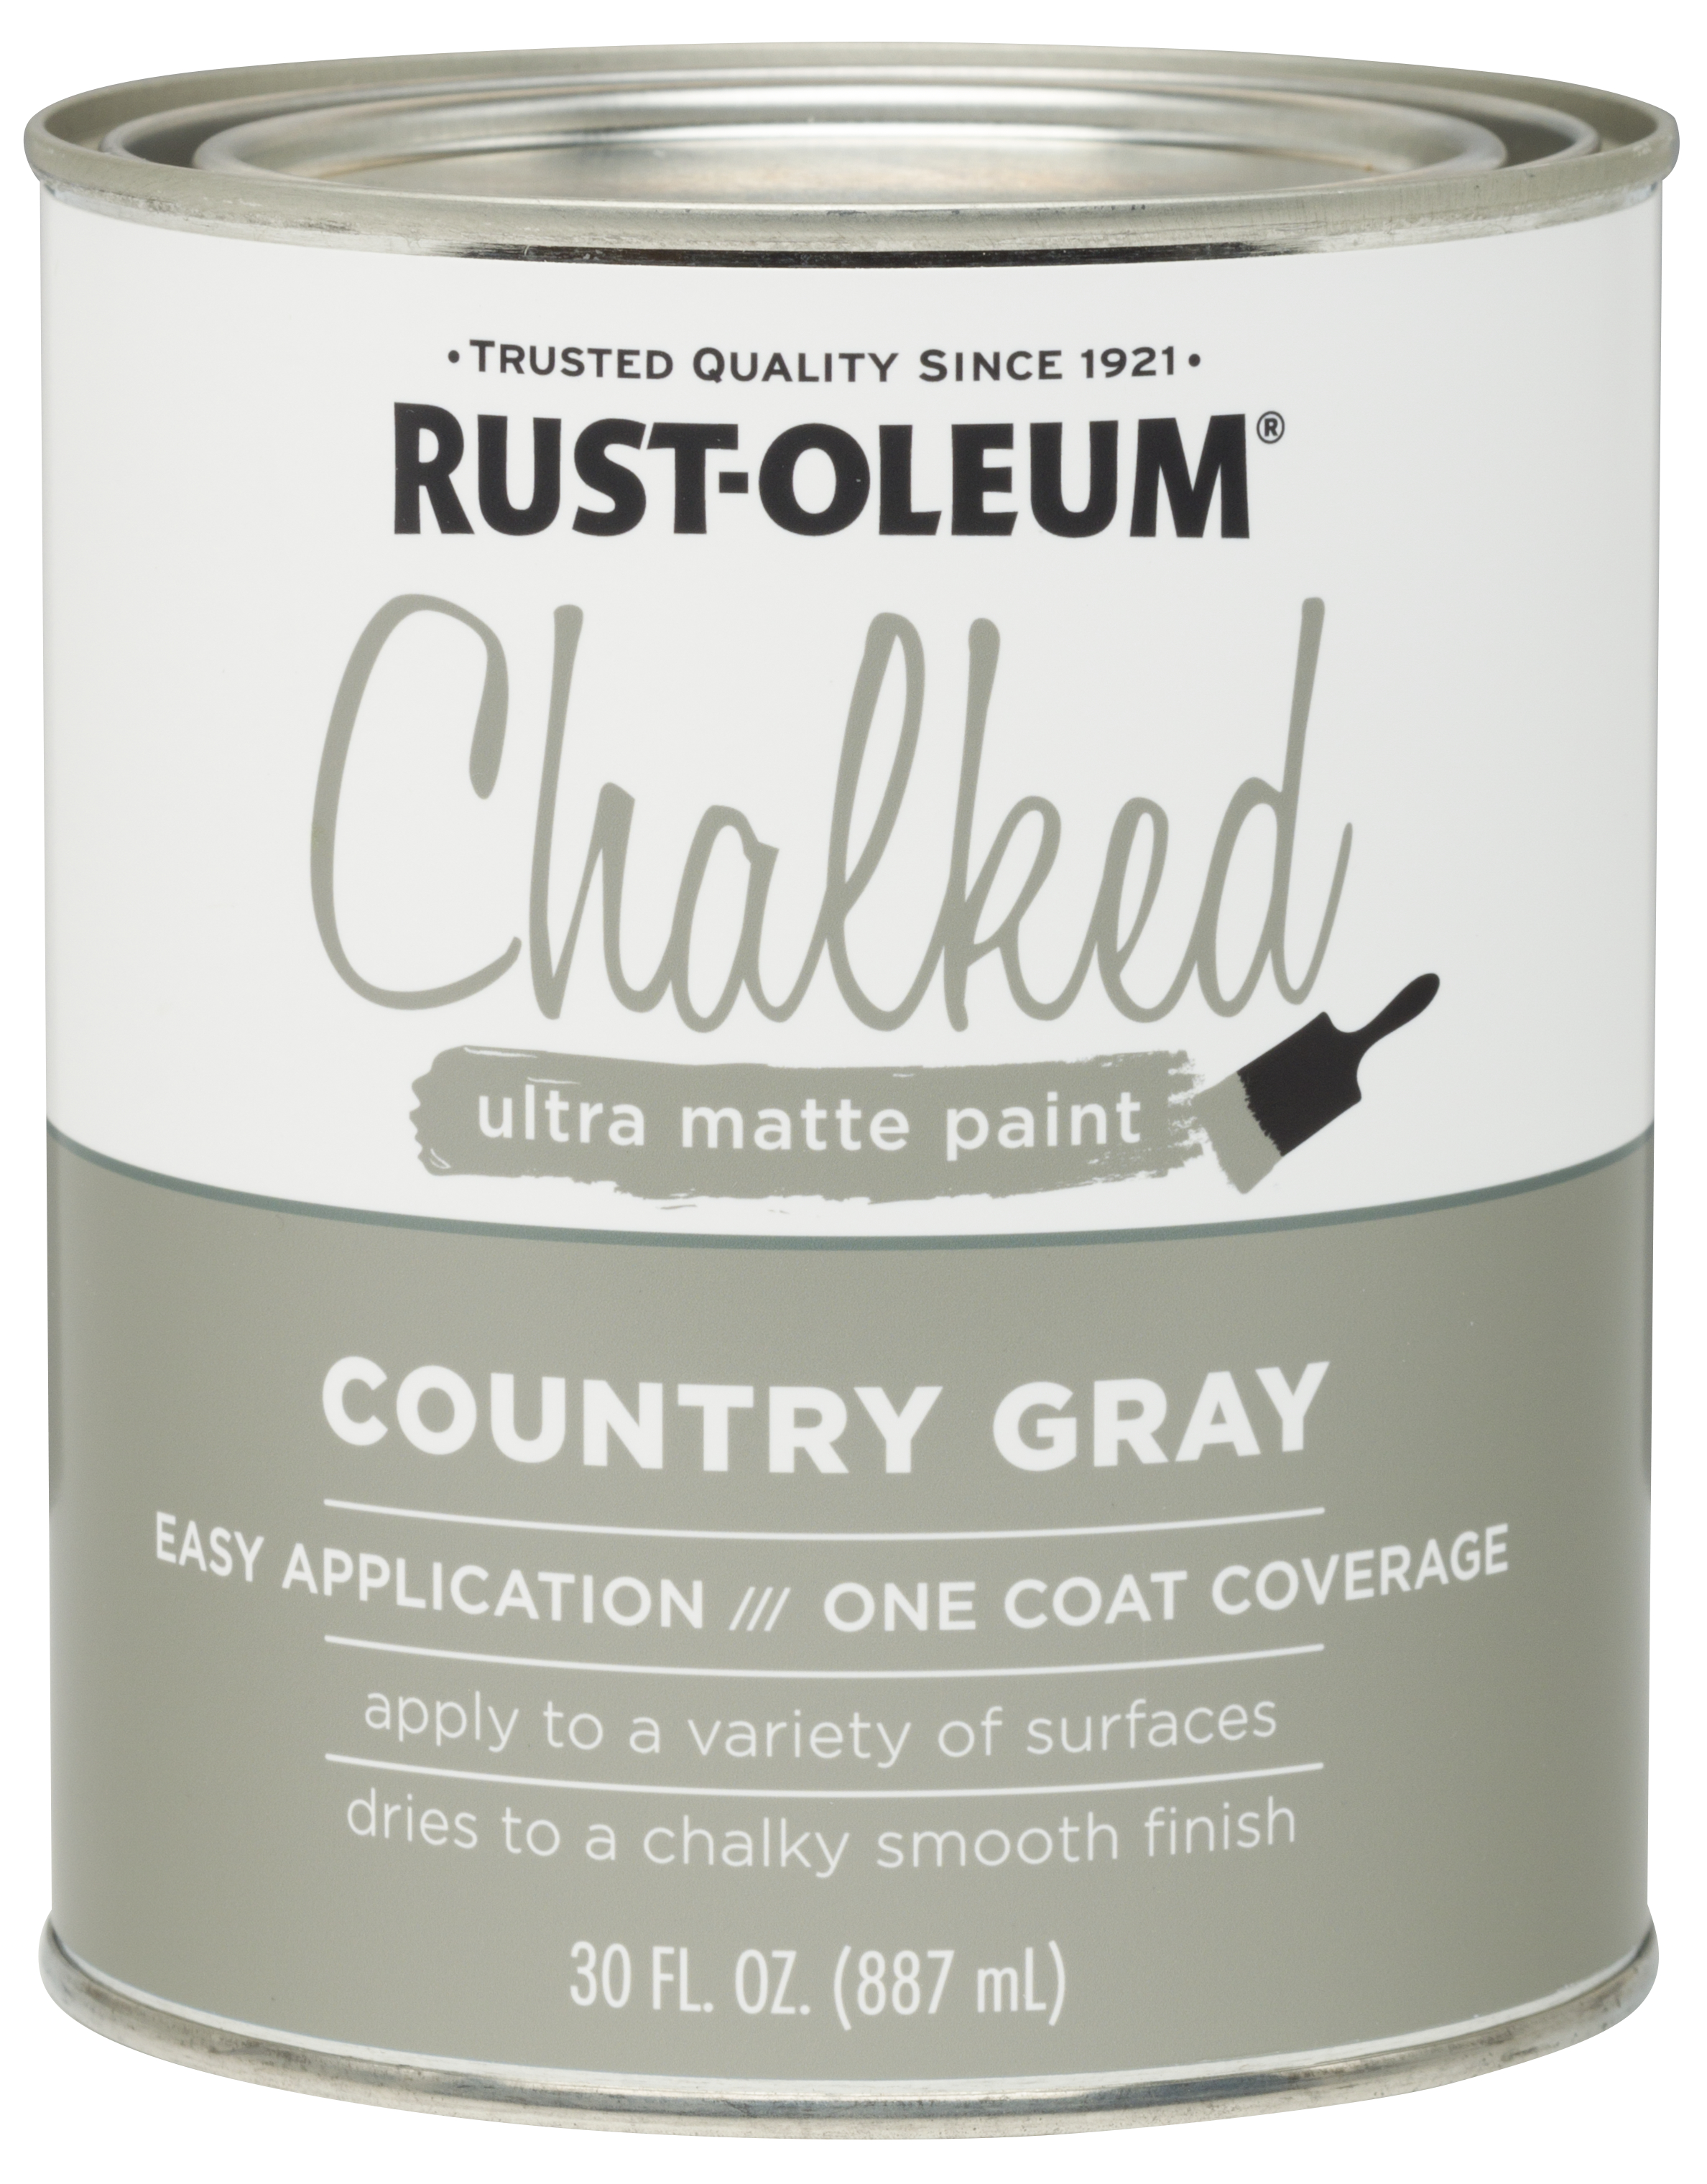 Country Gray, Rust-Oleum Chalked Ultra Matte Chalk Paint, Quart - image 2 of 8